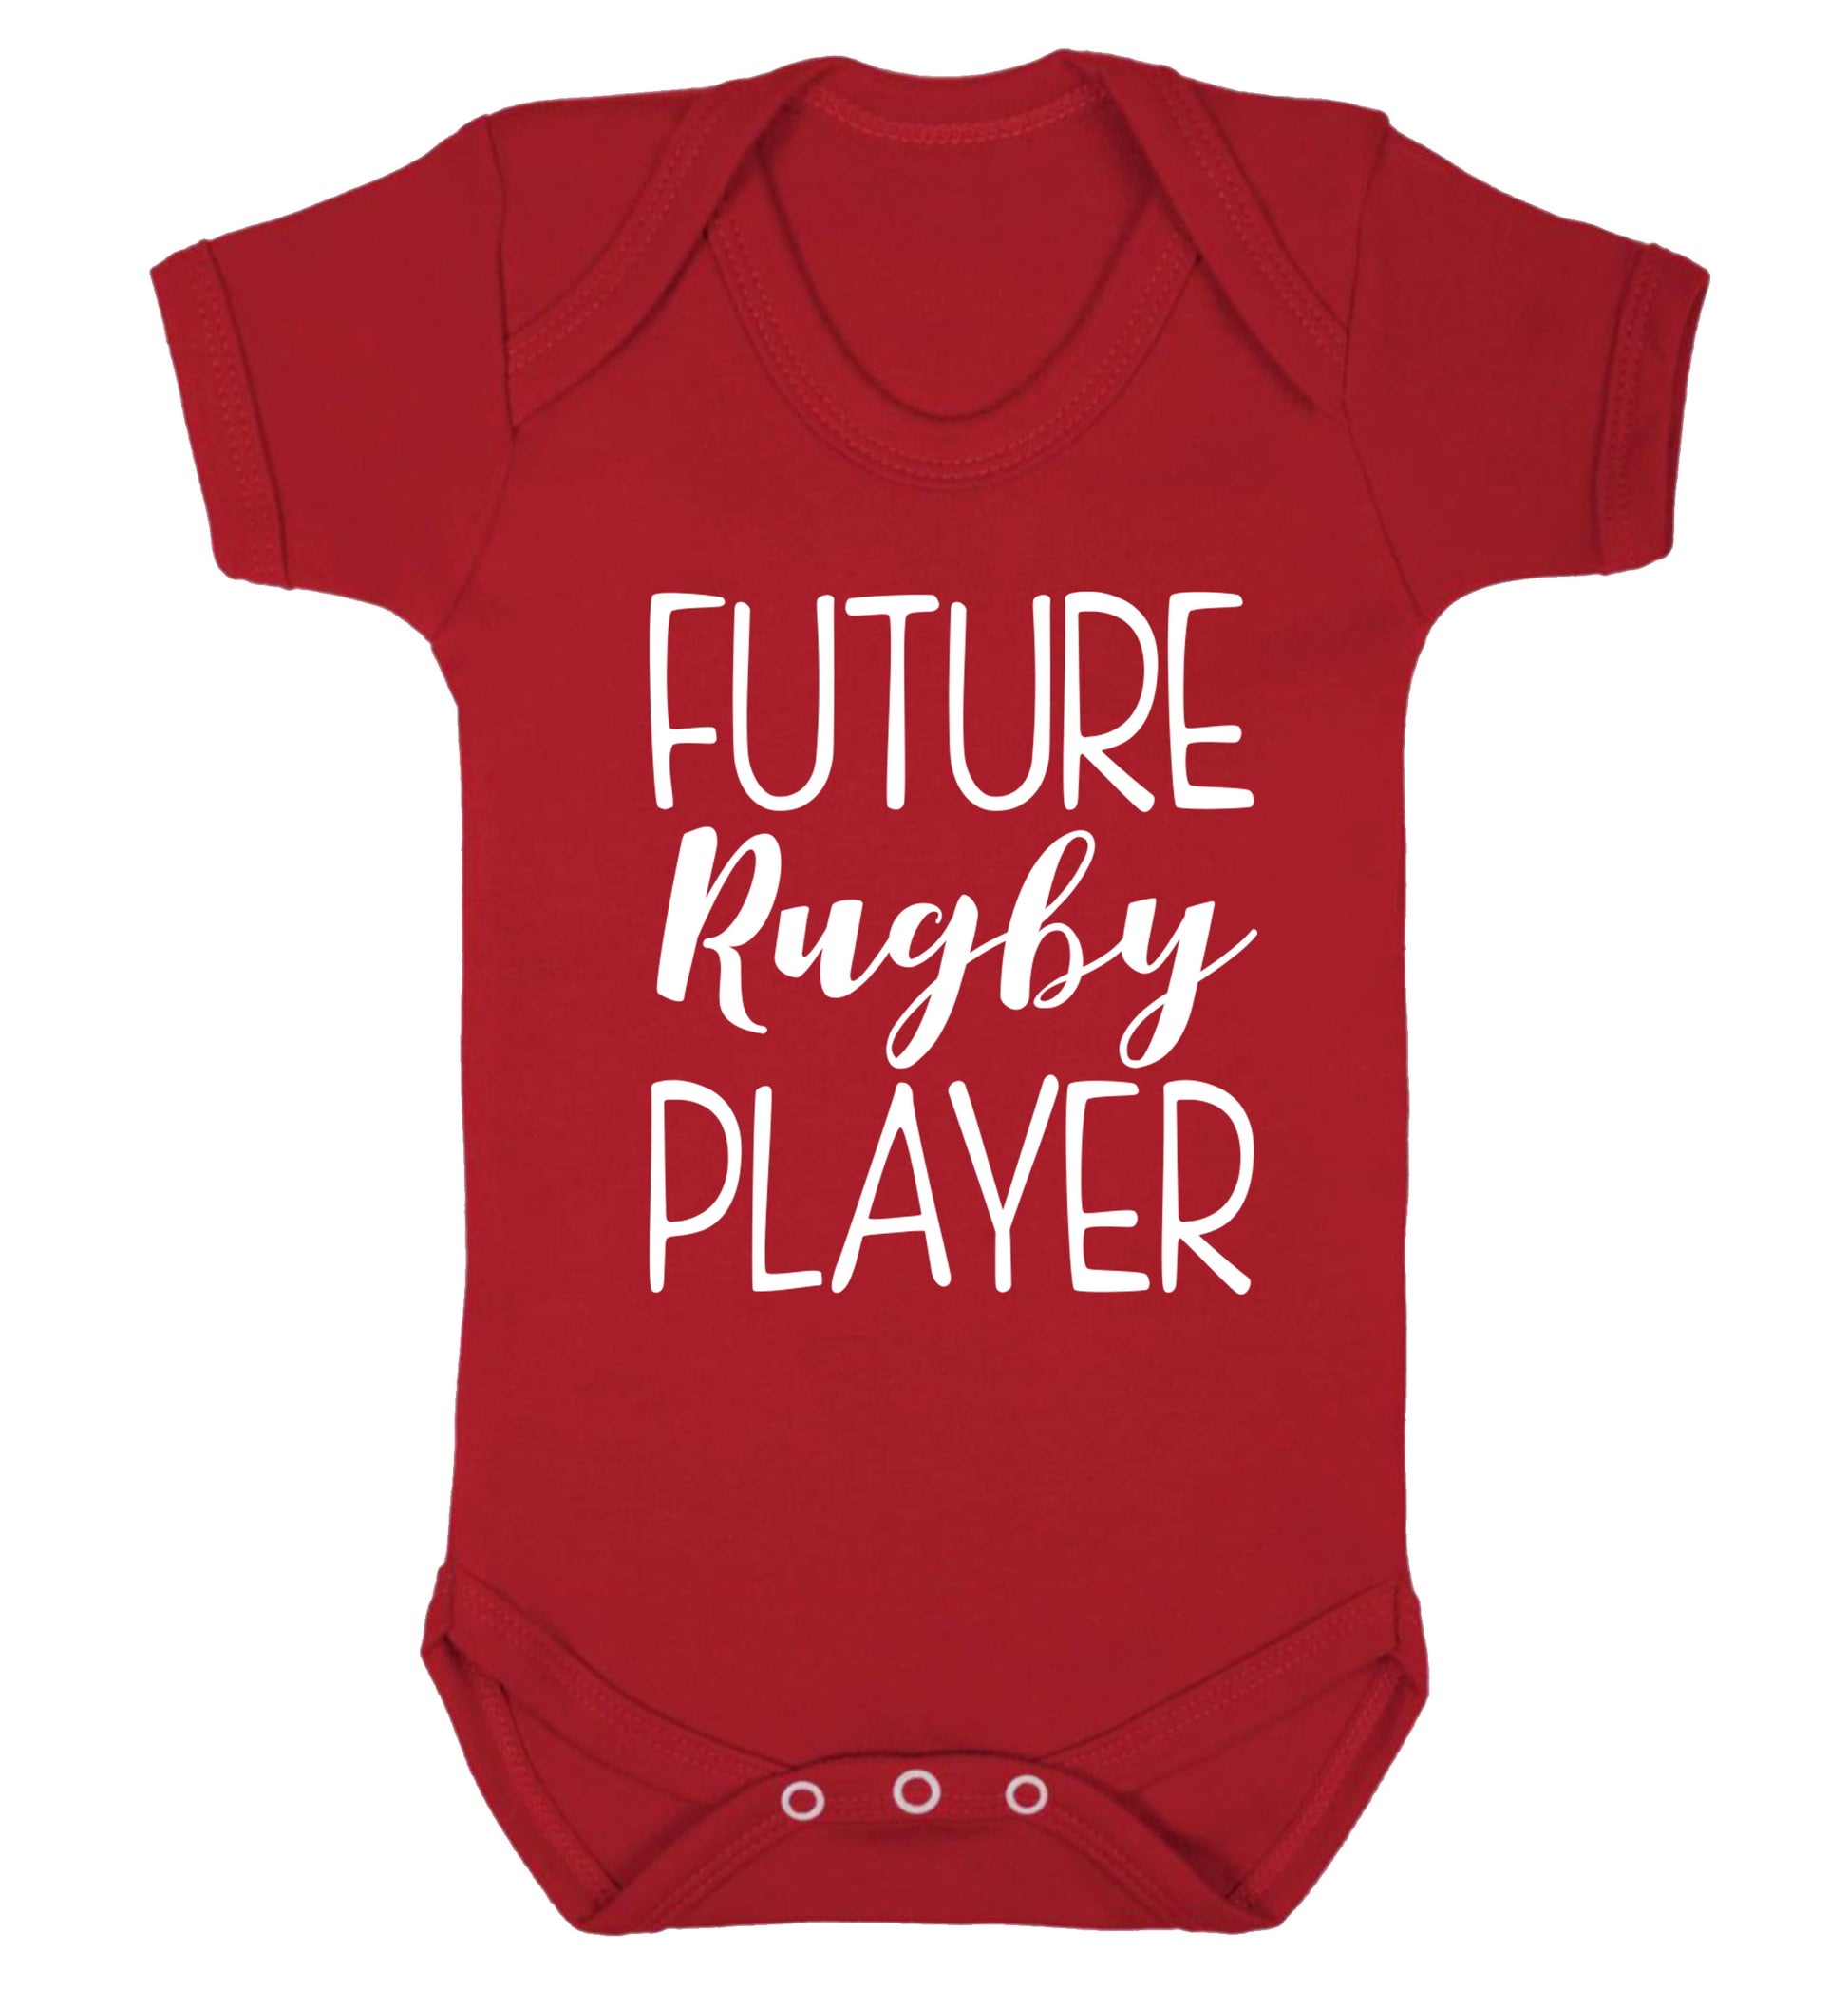 Future rugby player Baby Vest red 18-24 months